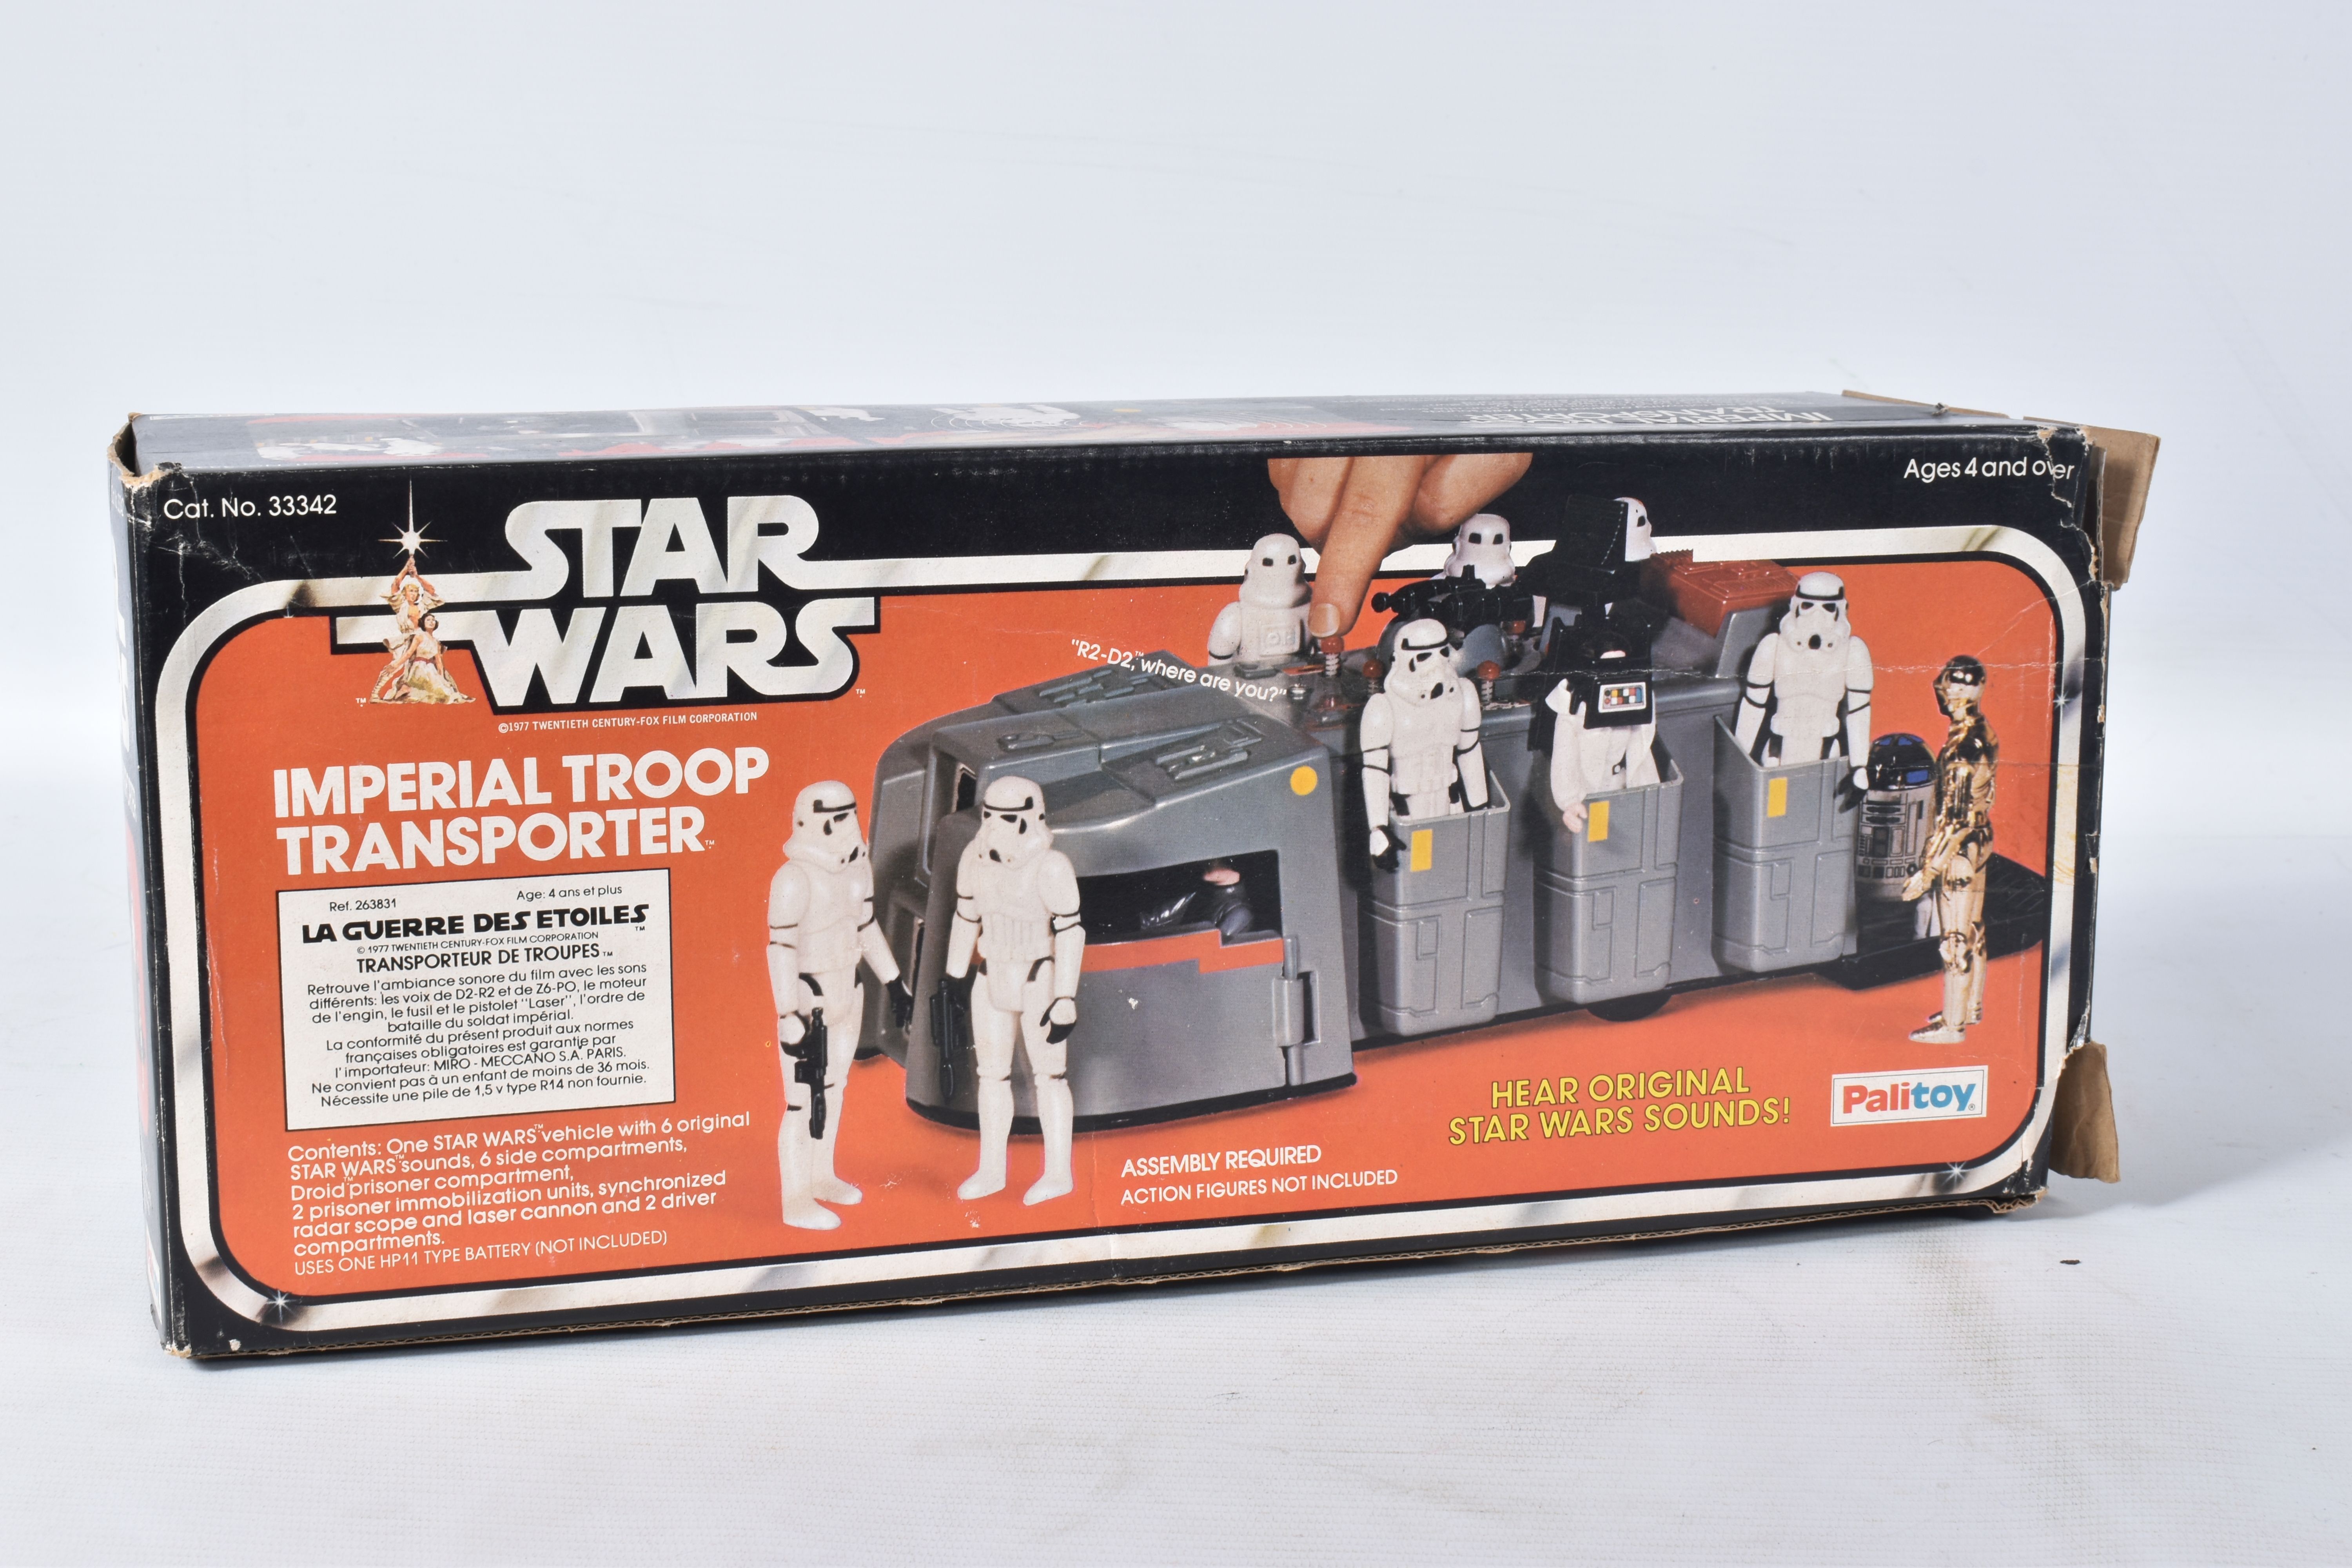 A BOXED PALITOY STAR WARS IMPERIAL TROOP TRANSPORTER, no. 33342, Sellotape has been removed from - Image 10 of 14